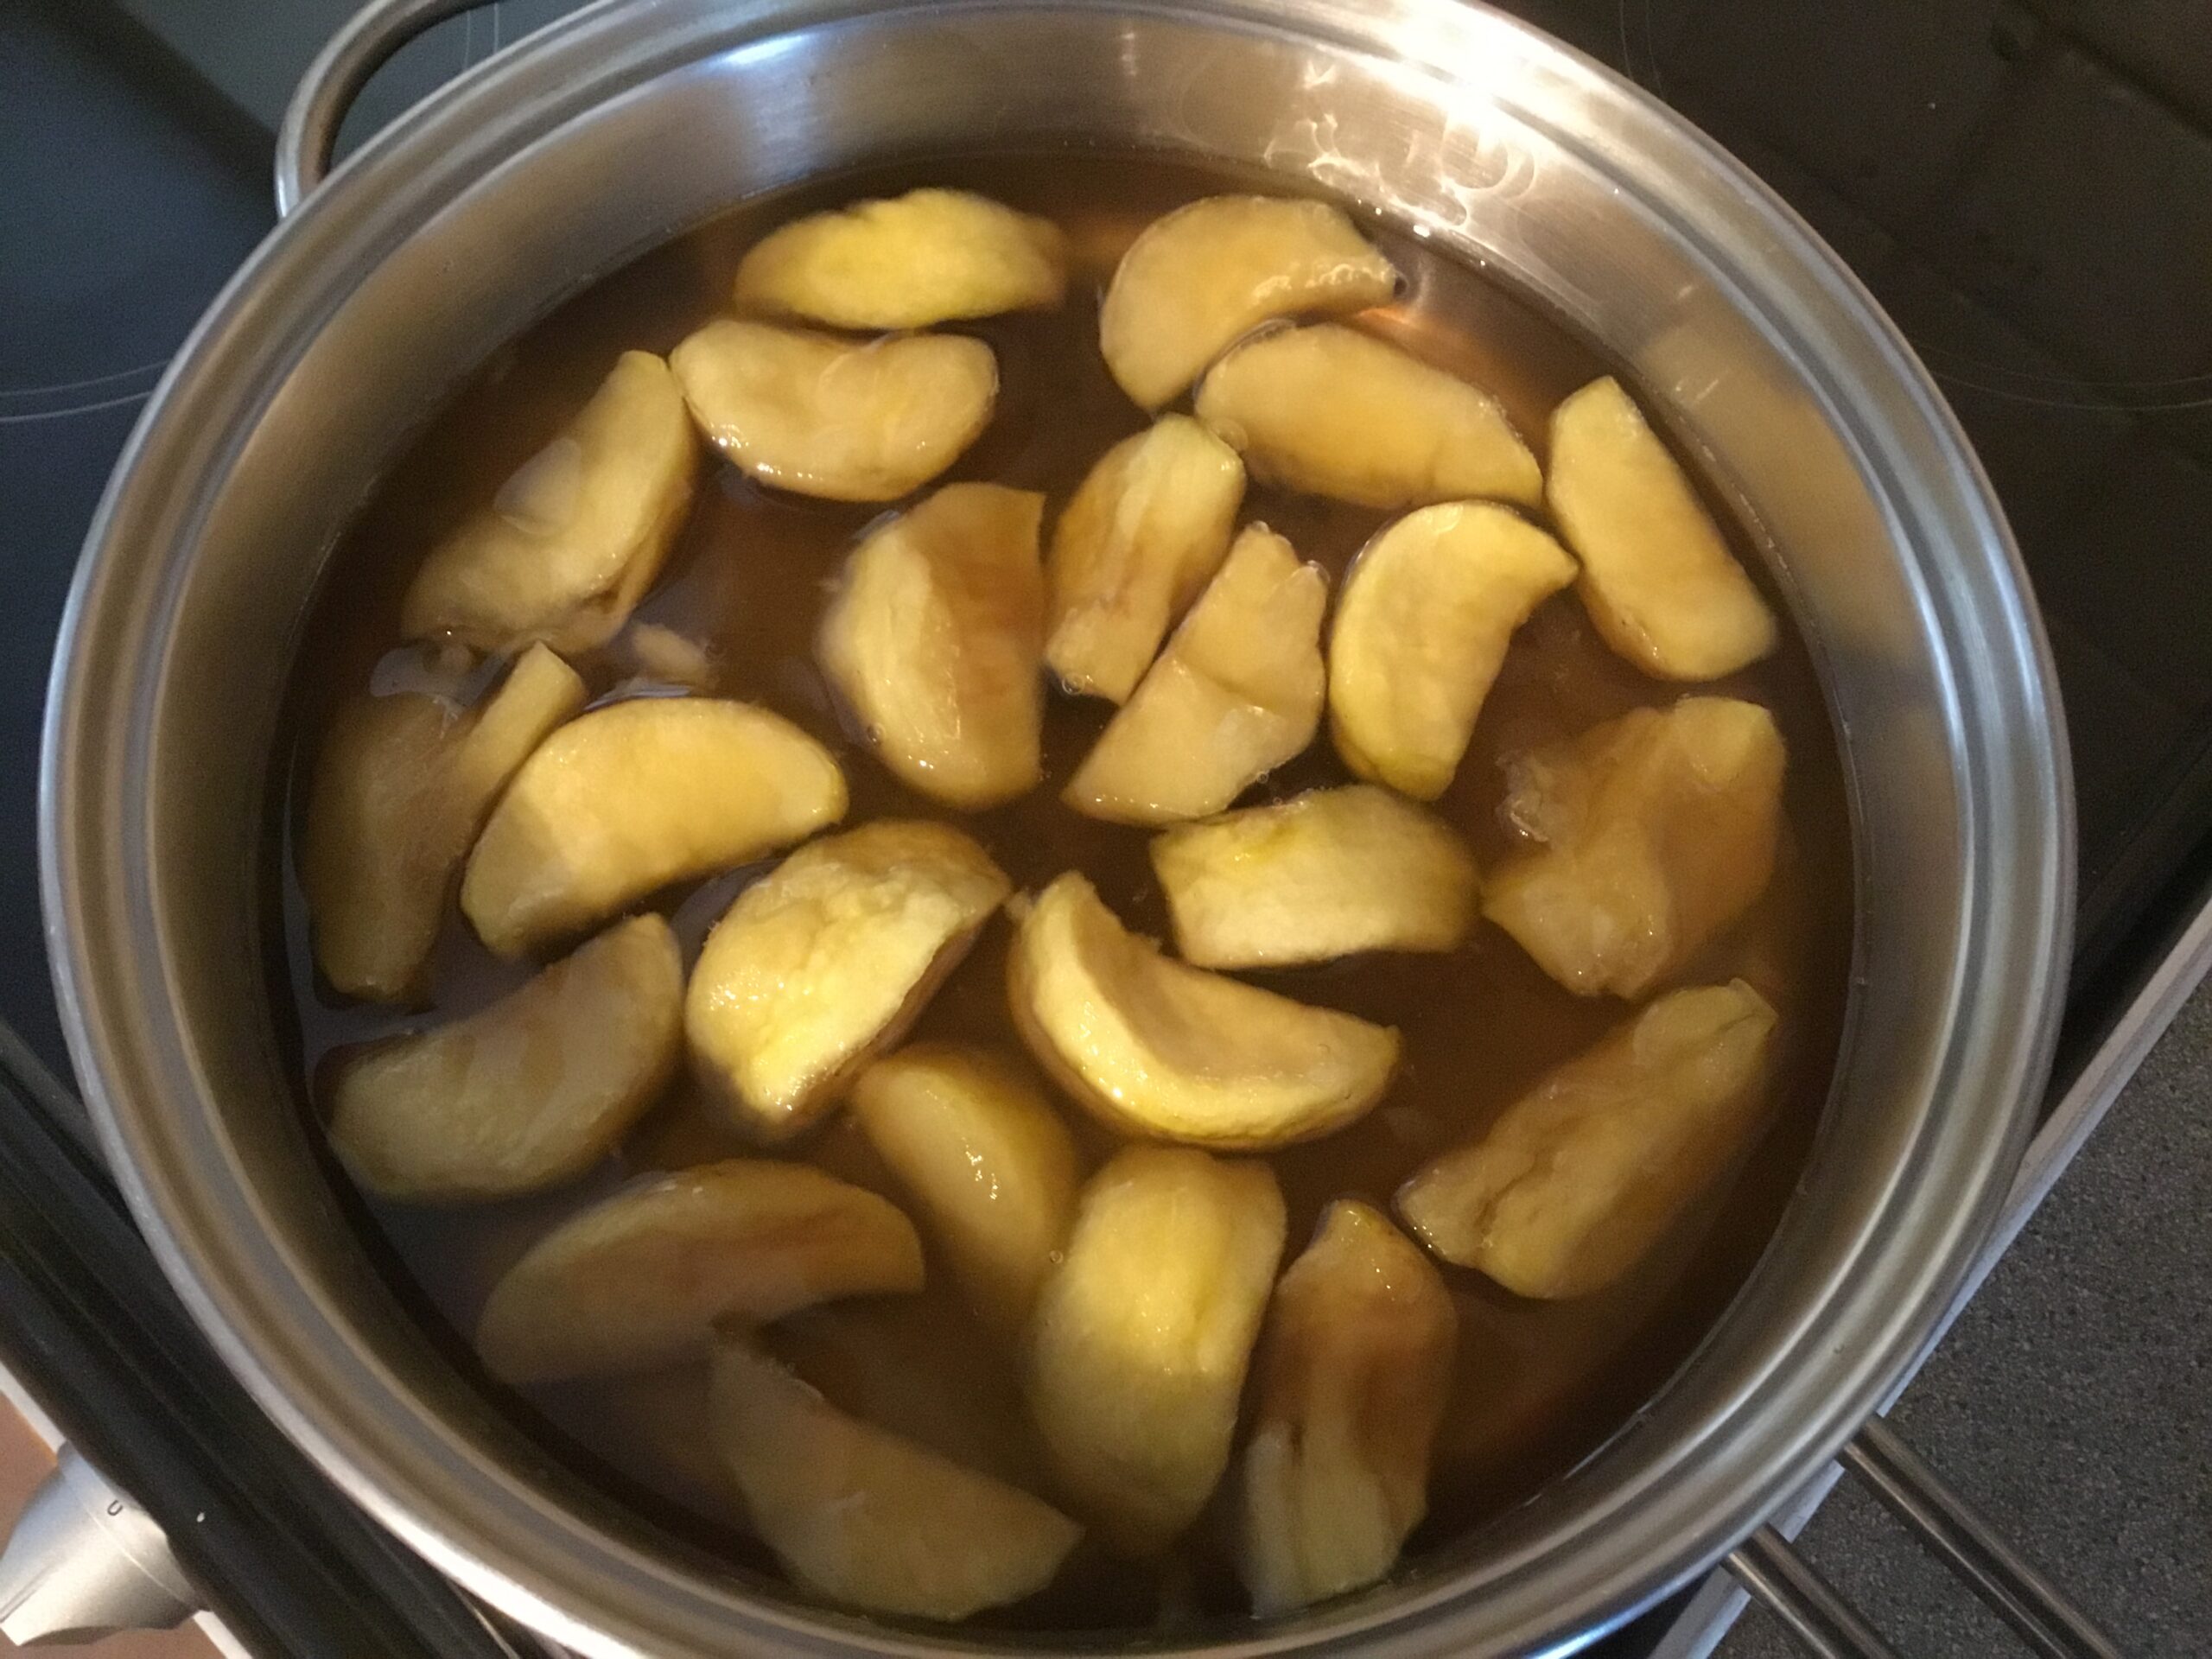 Starting the apples' second cooking